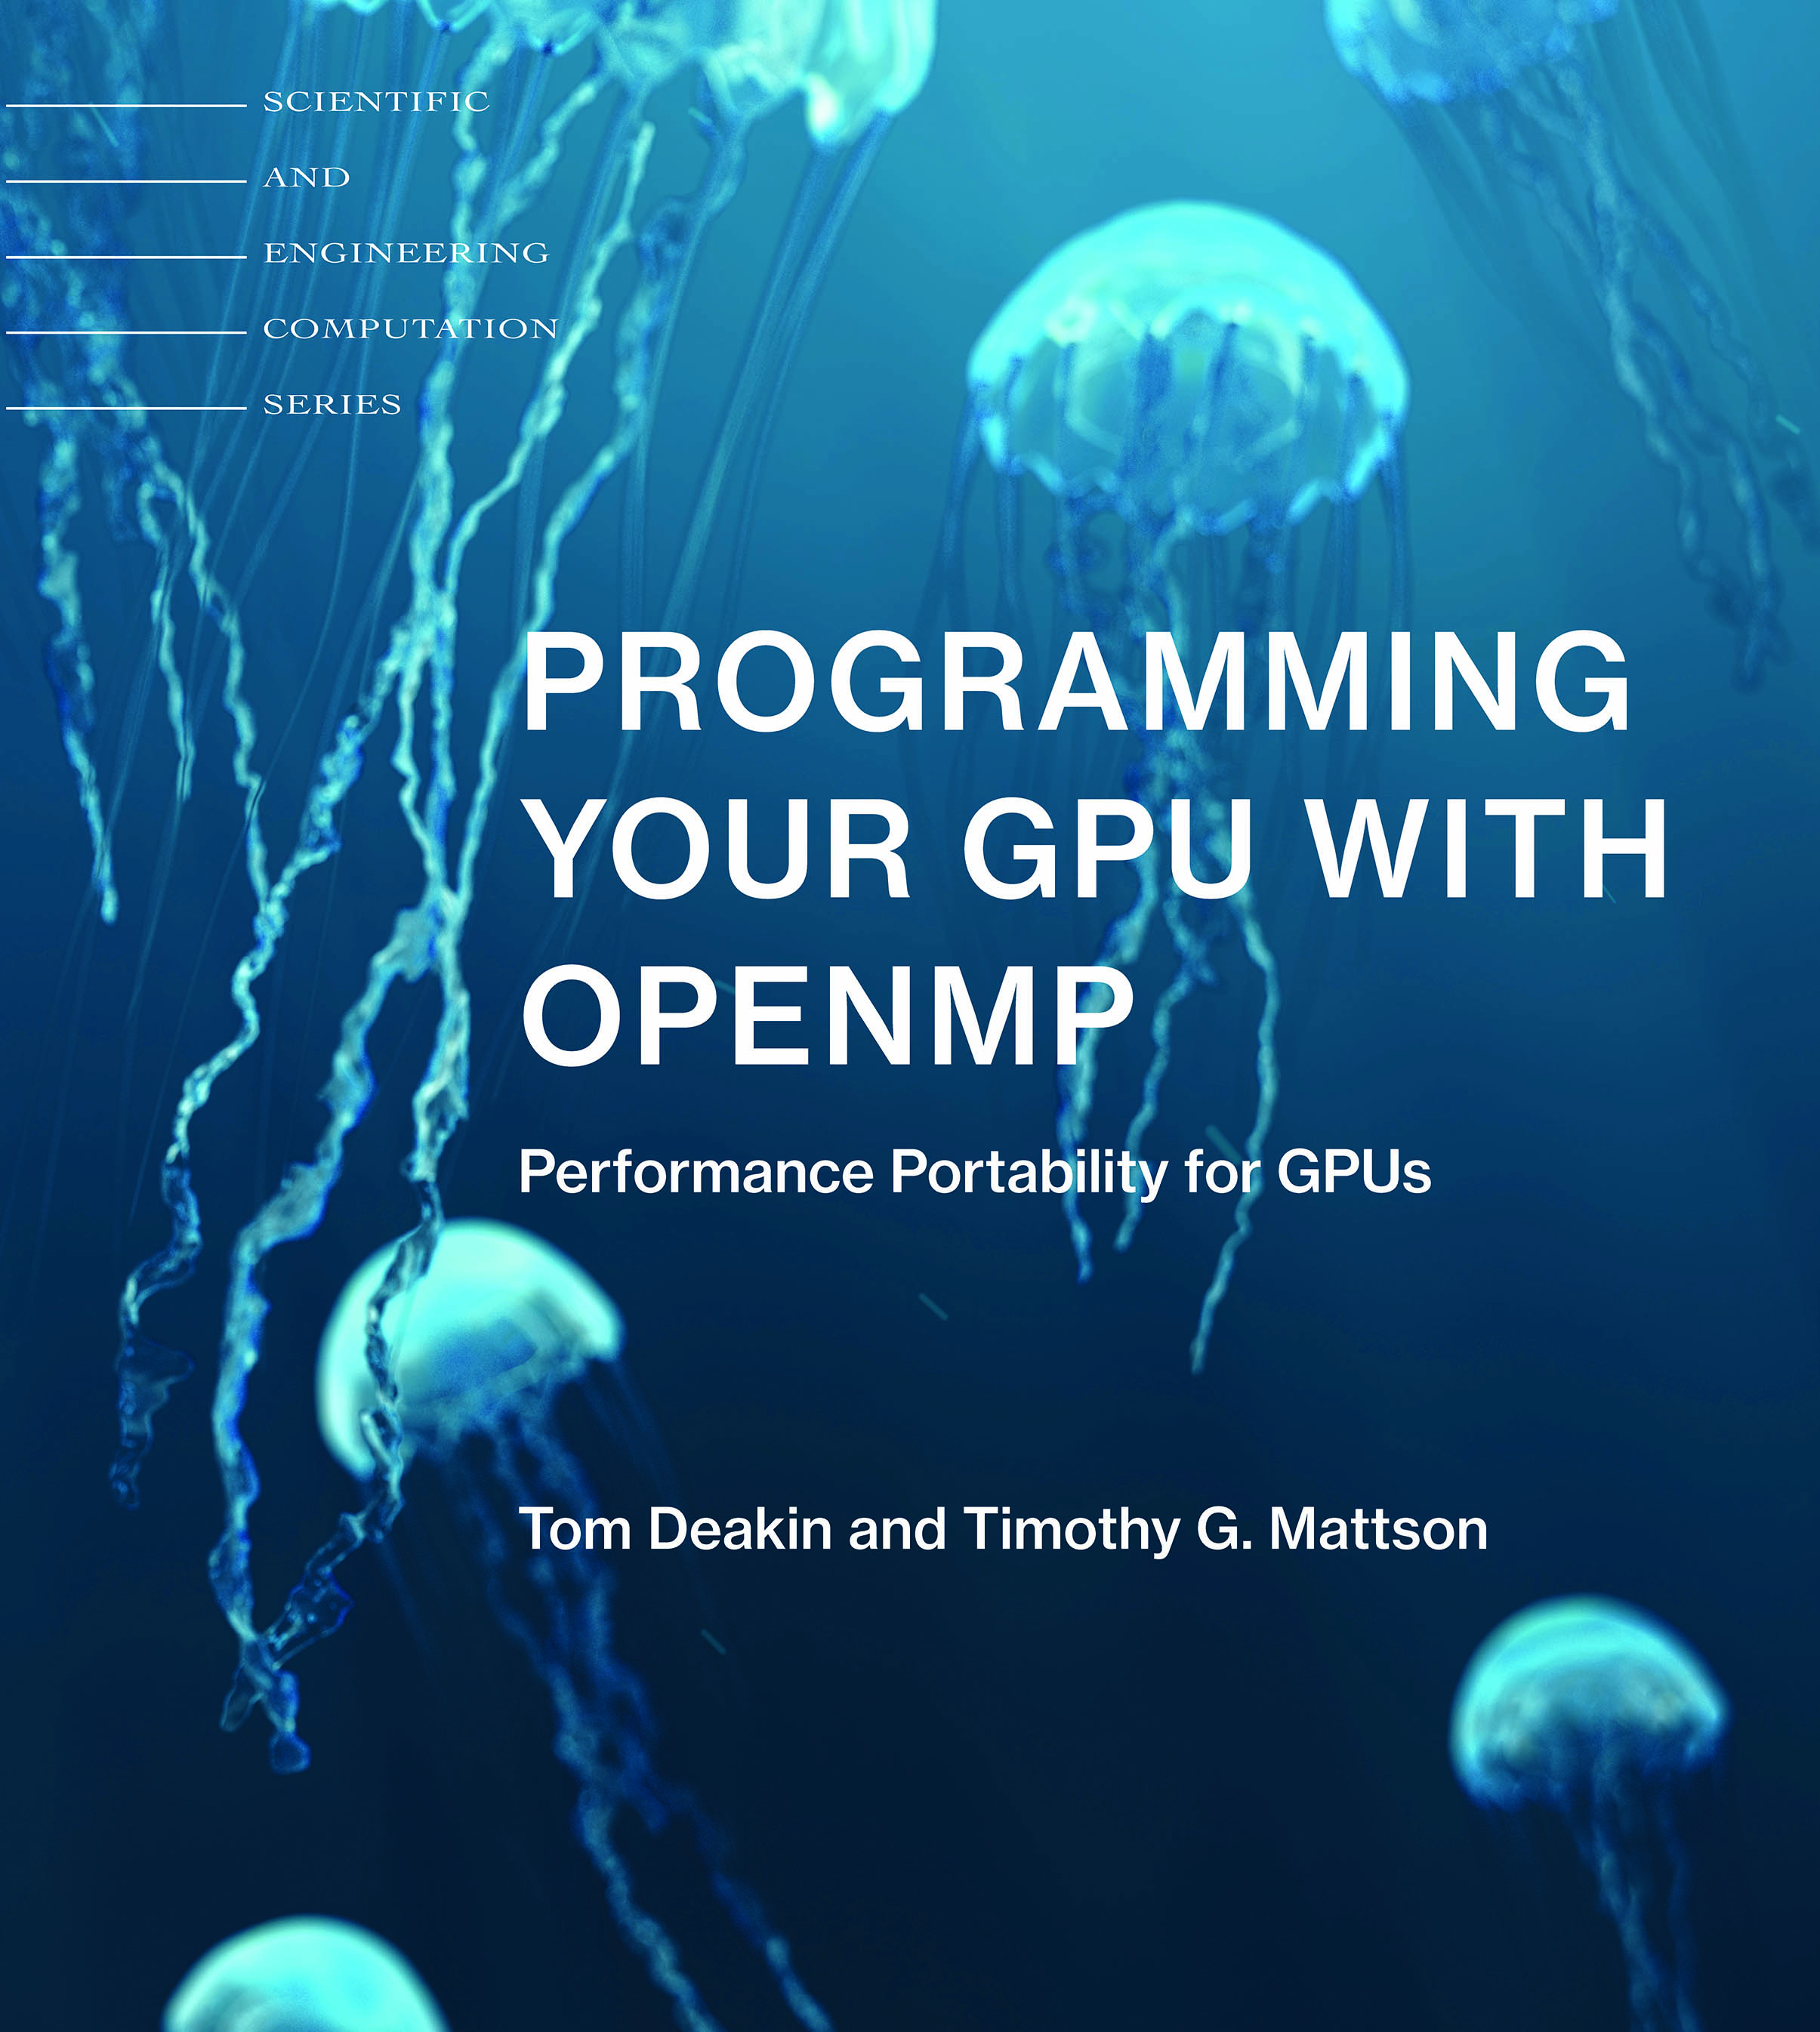 Cover for Programming Your GPU with OpenMP book published by MIT Press